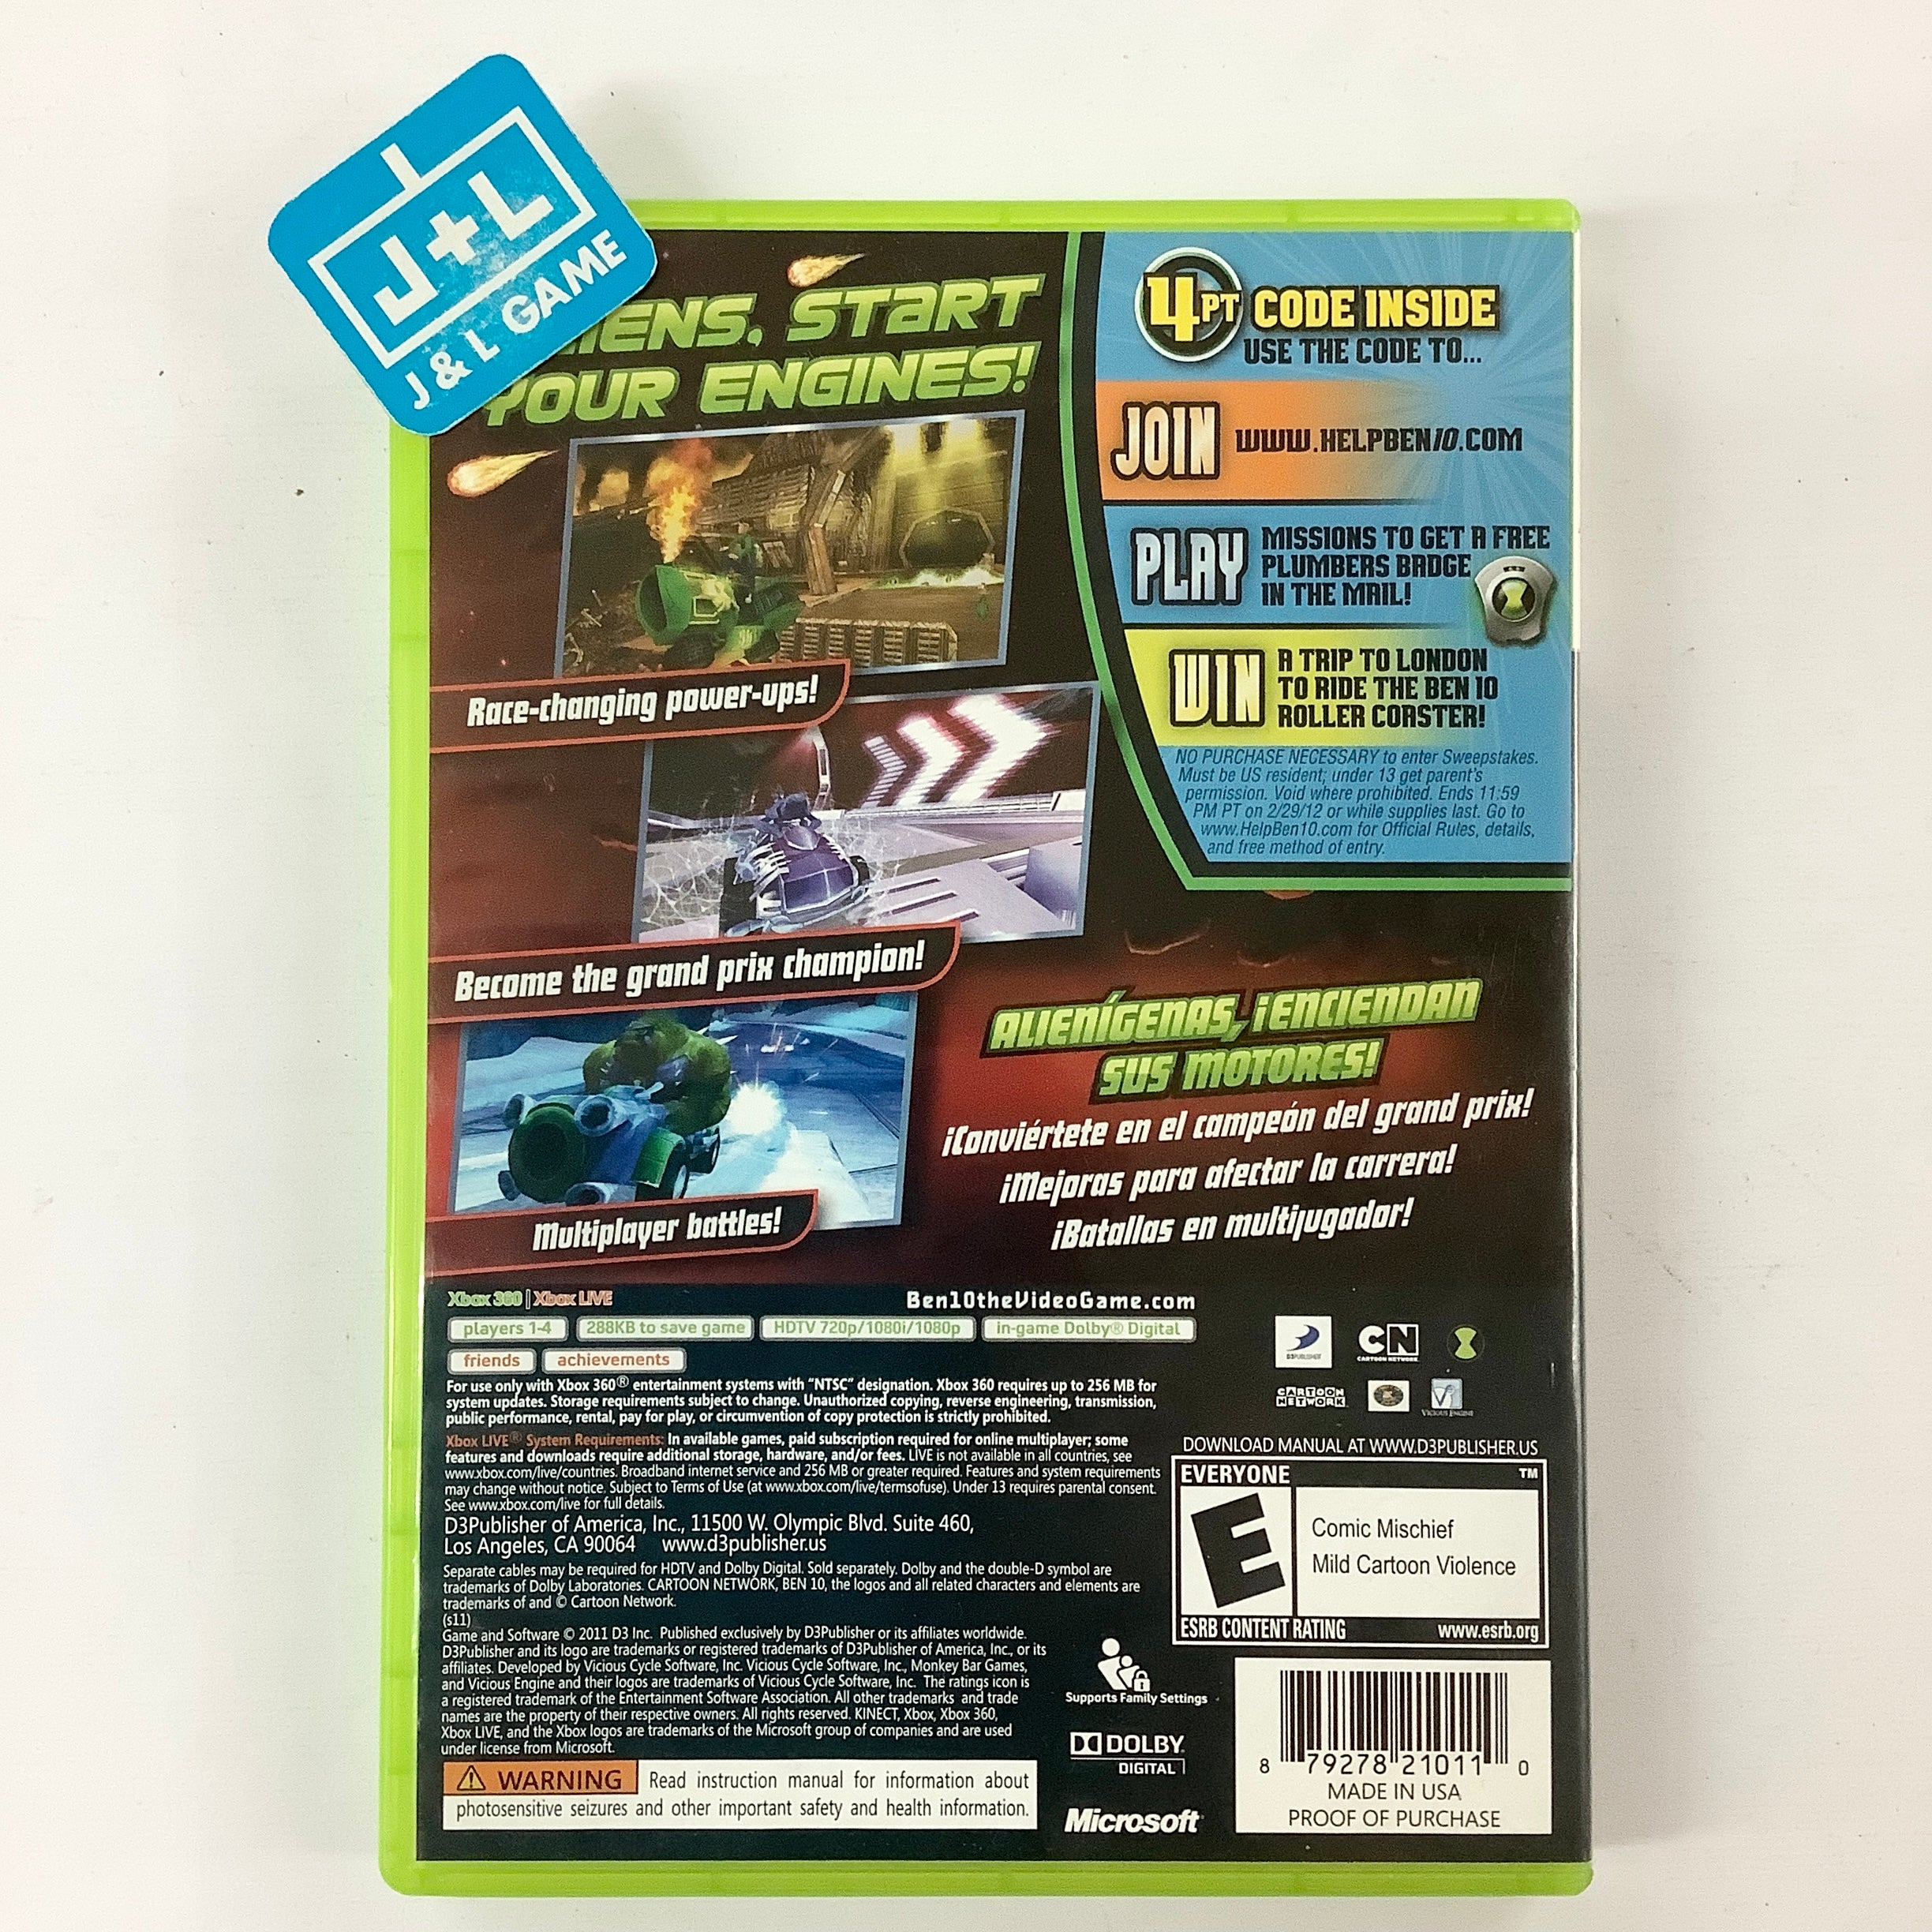 Ben 10: Galactic Racing - Xbox 360 [Pre-Owned] Video Games D3Publisher   